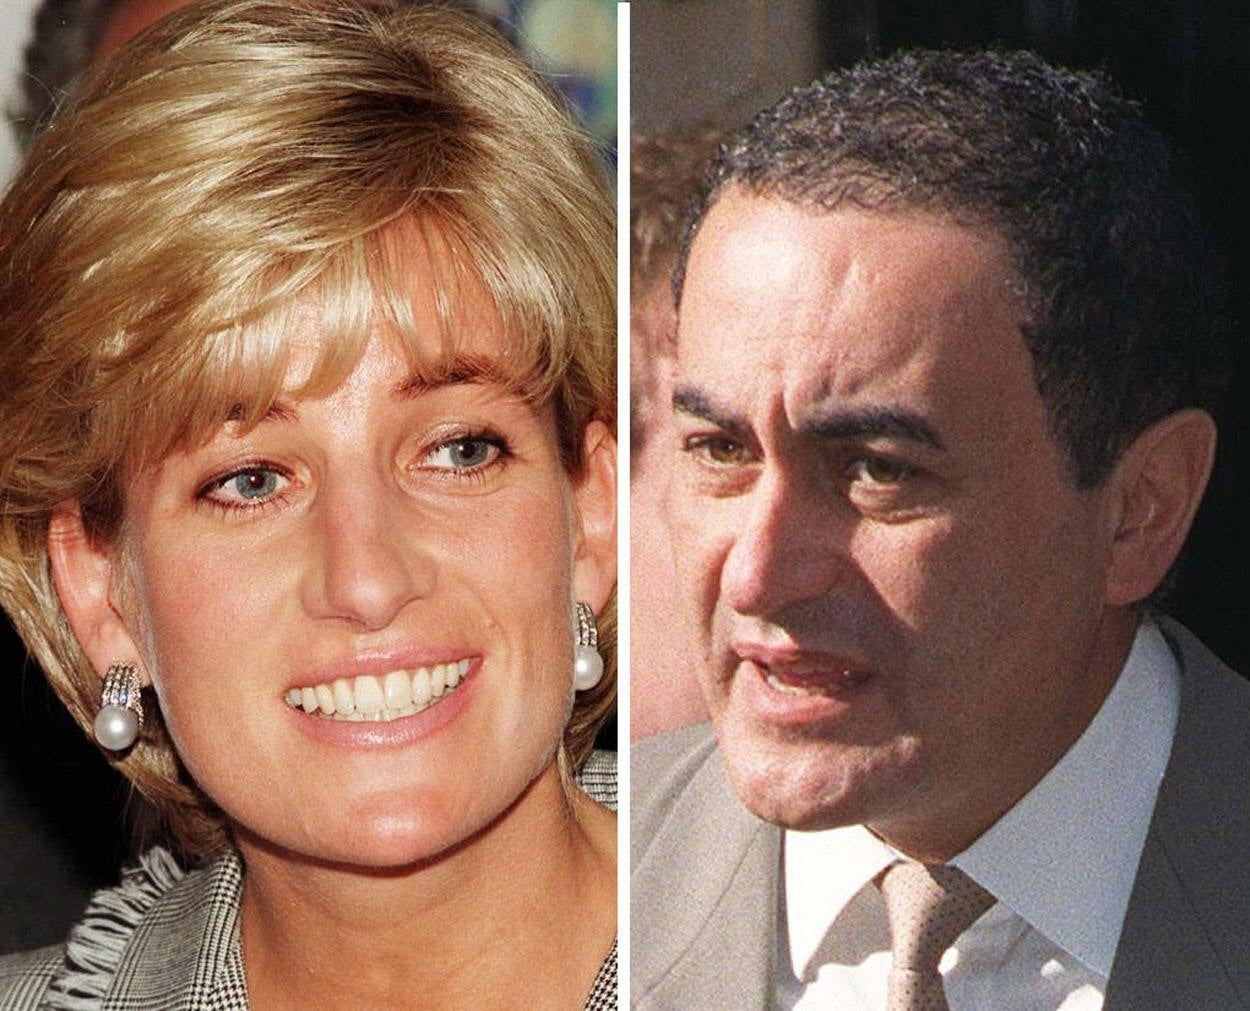 Mr Al Fayed was tortured by the deaths of Princess Diana and his son Dodi Al Fayed